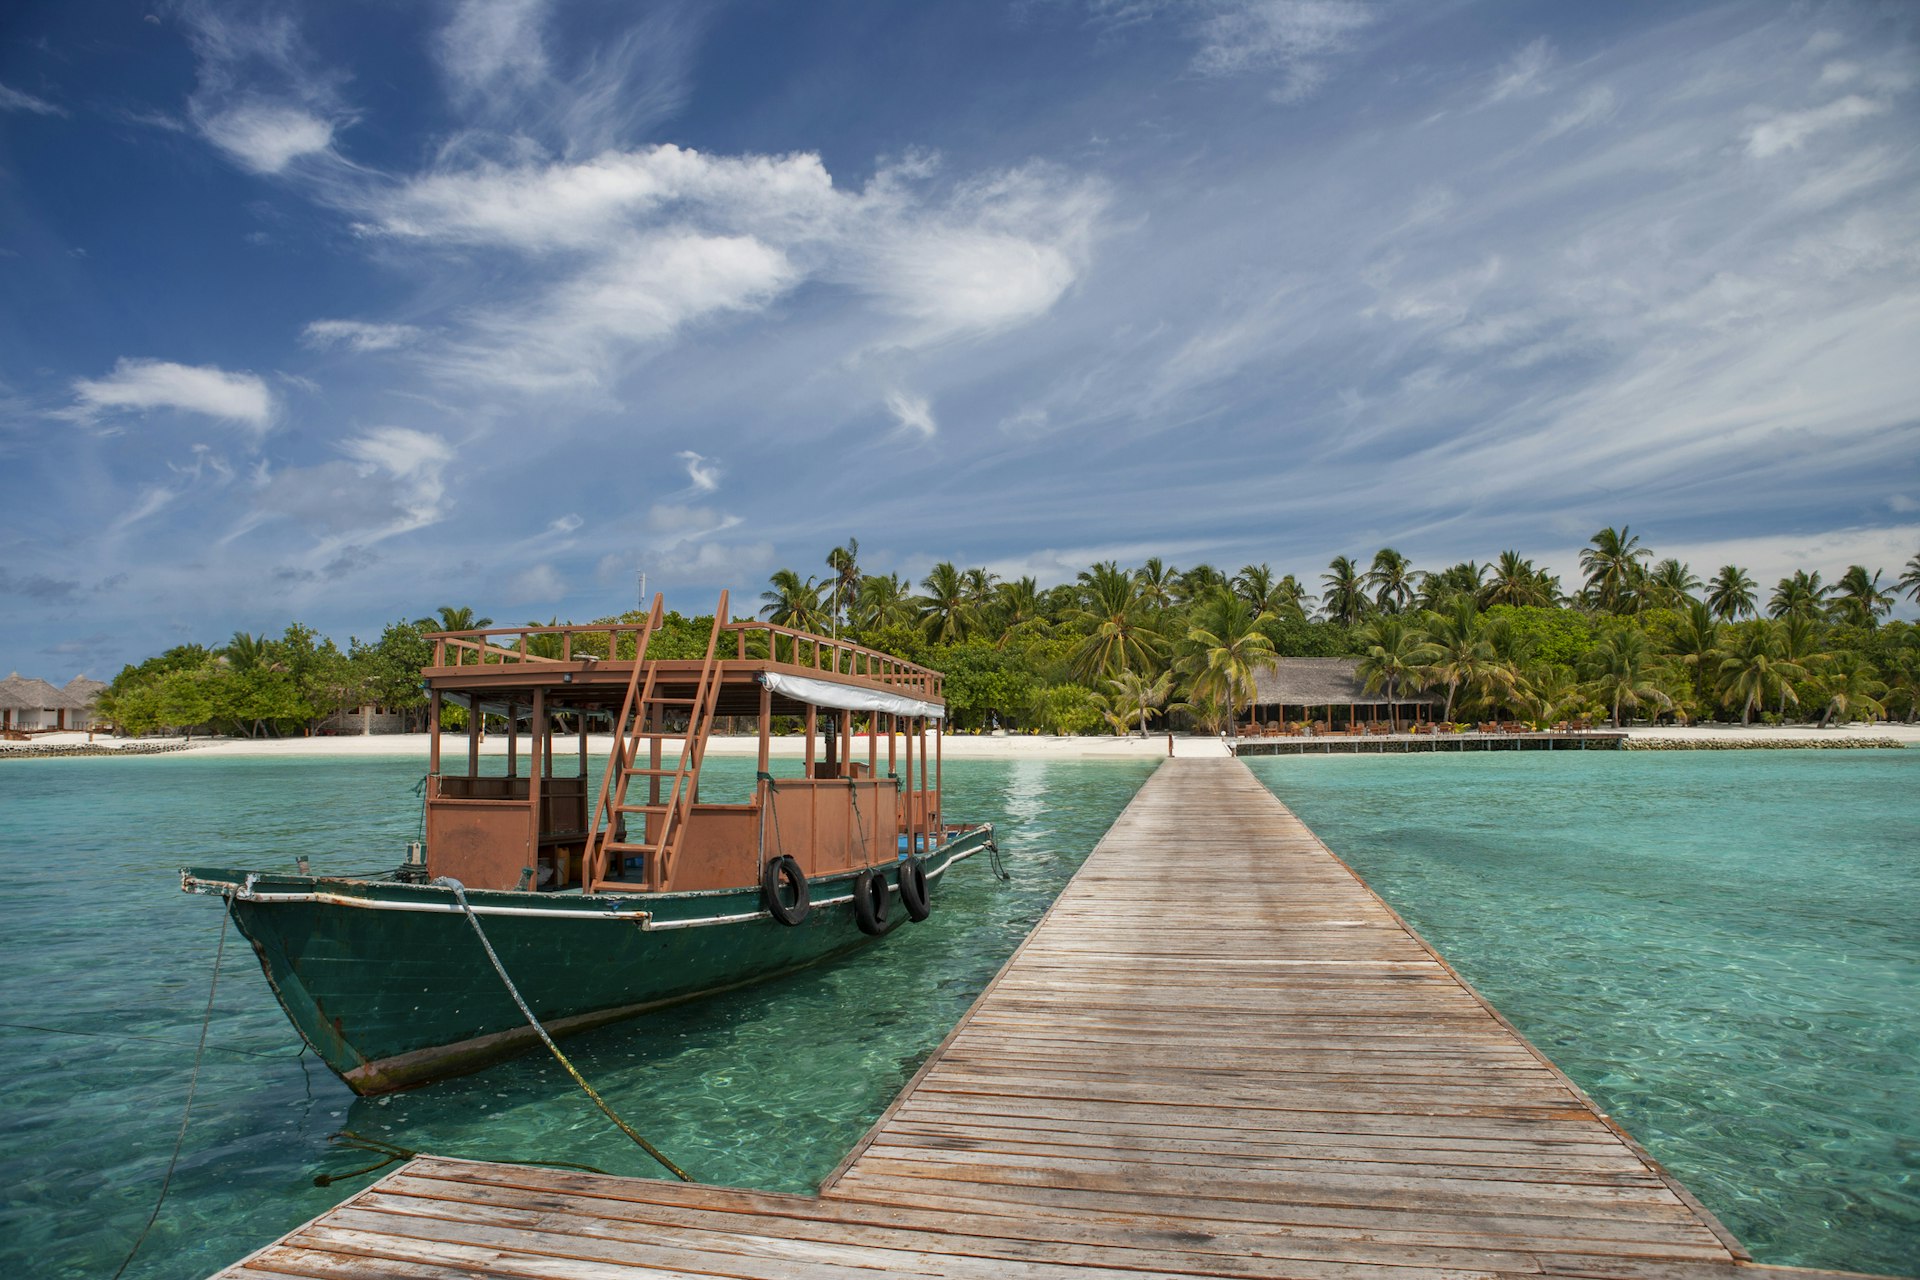 A traditional wooden boat moored next to a long pier with a tropical island in the background